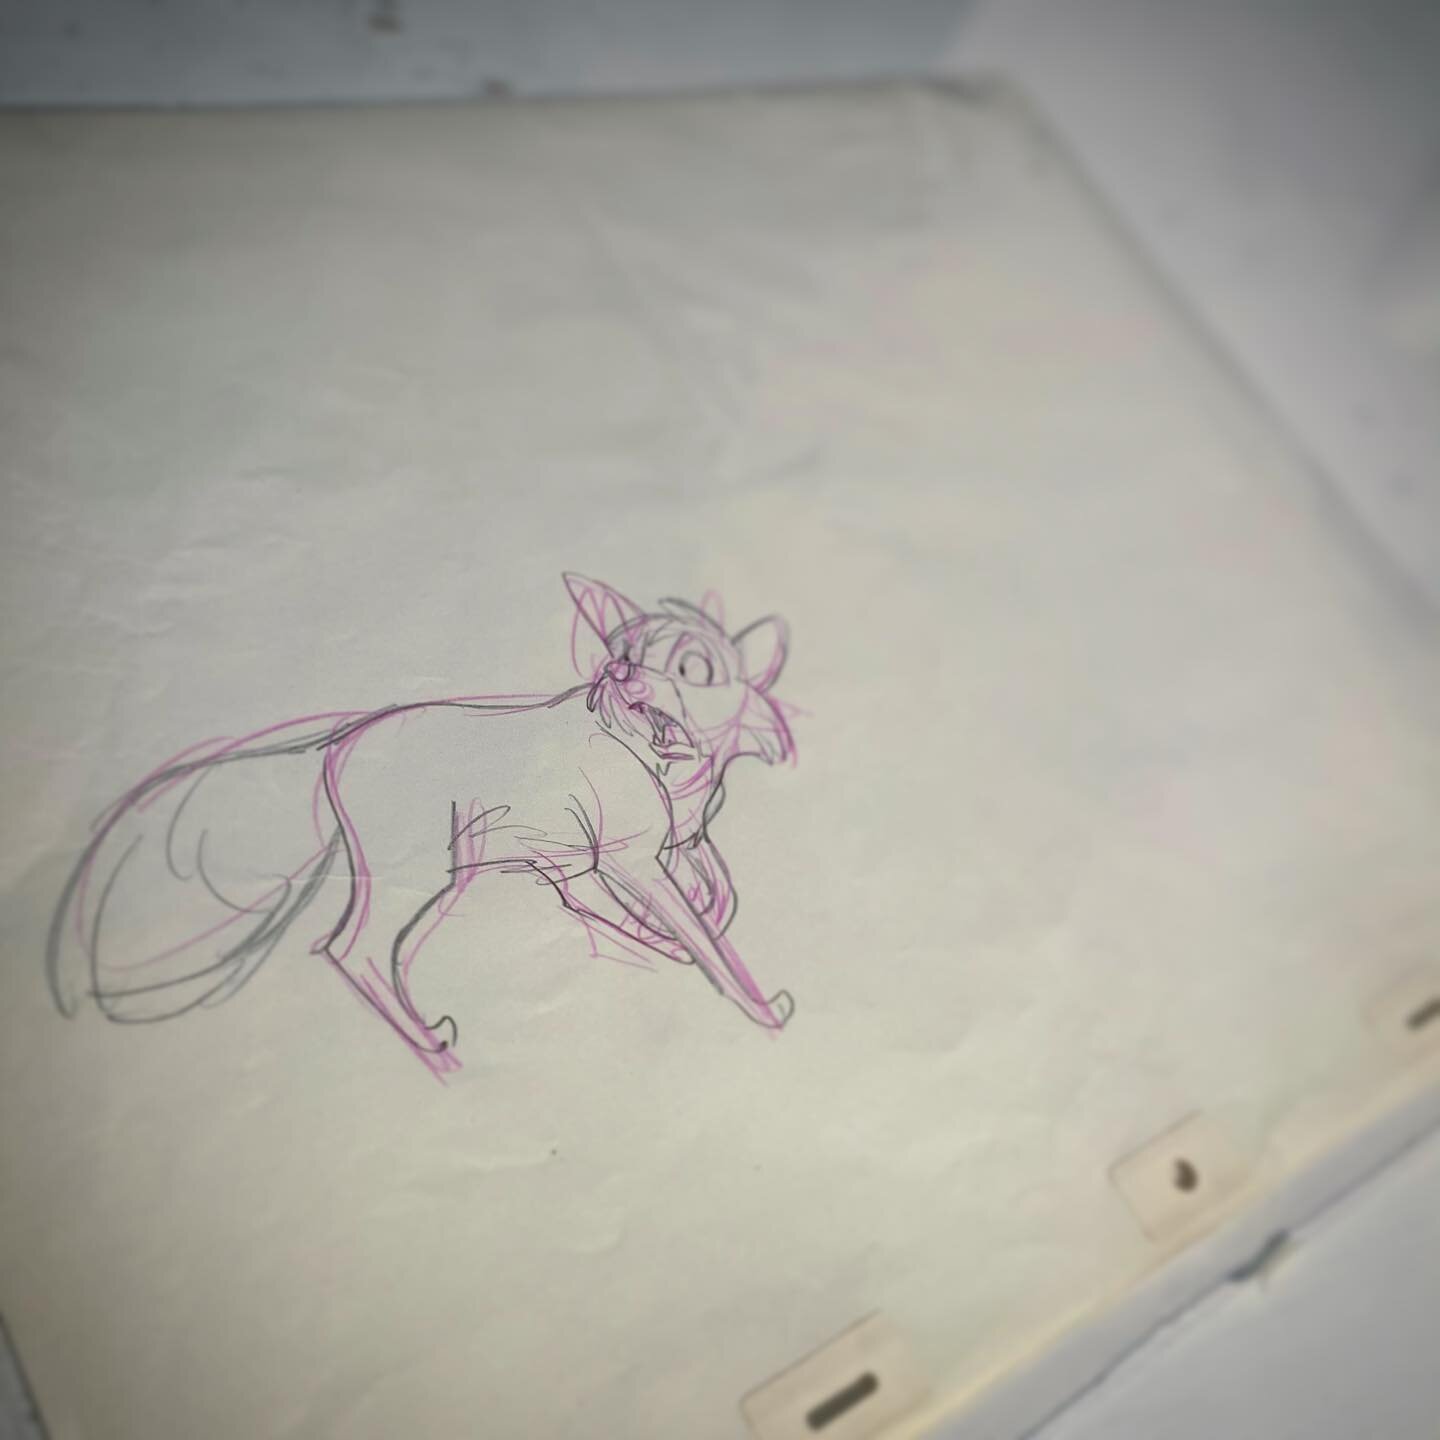 Just received a rough animation drawing by John Pomeroy, from one of my favorite childhood movies, The Fox and the Hound.